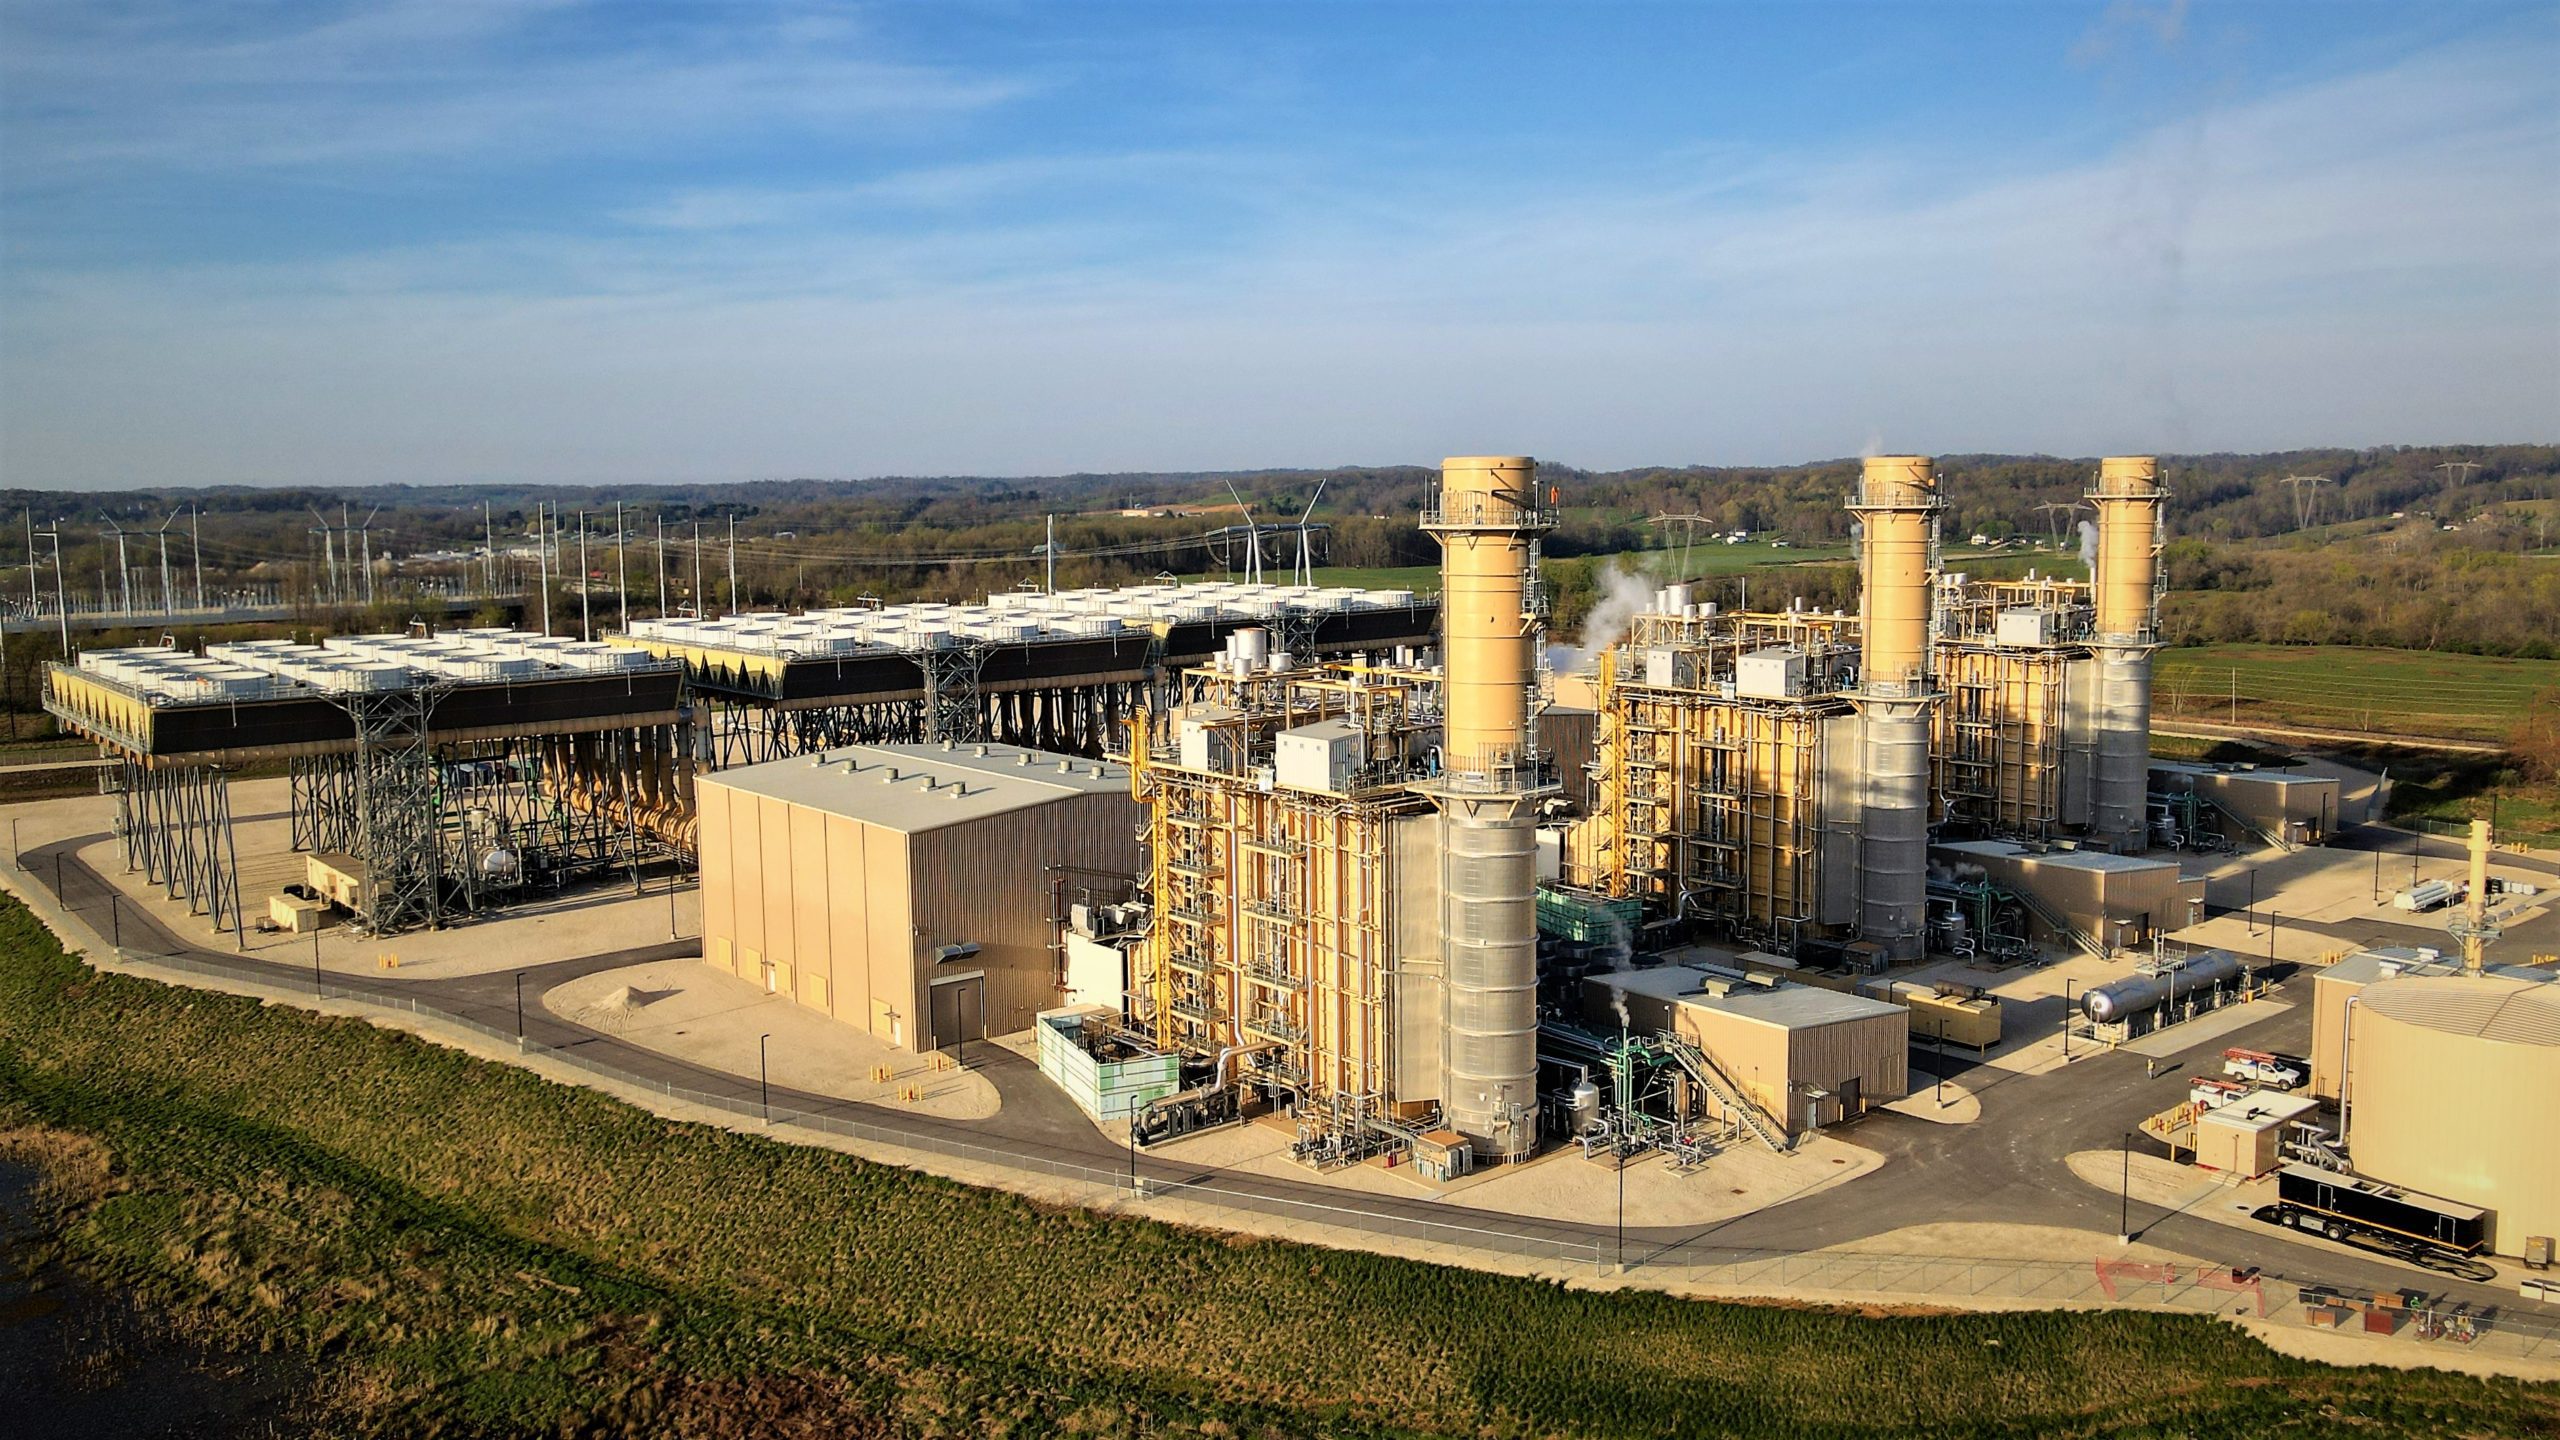 GE-powered combined cycle plant now providing 1.8 GW of electricity in Ohio